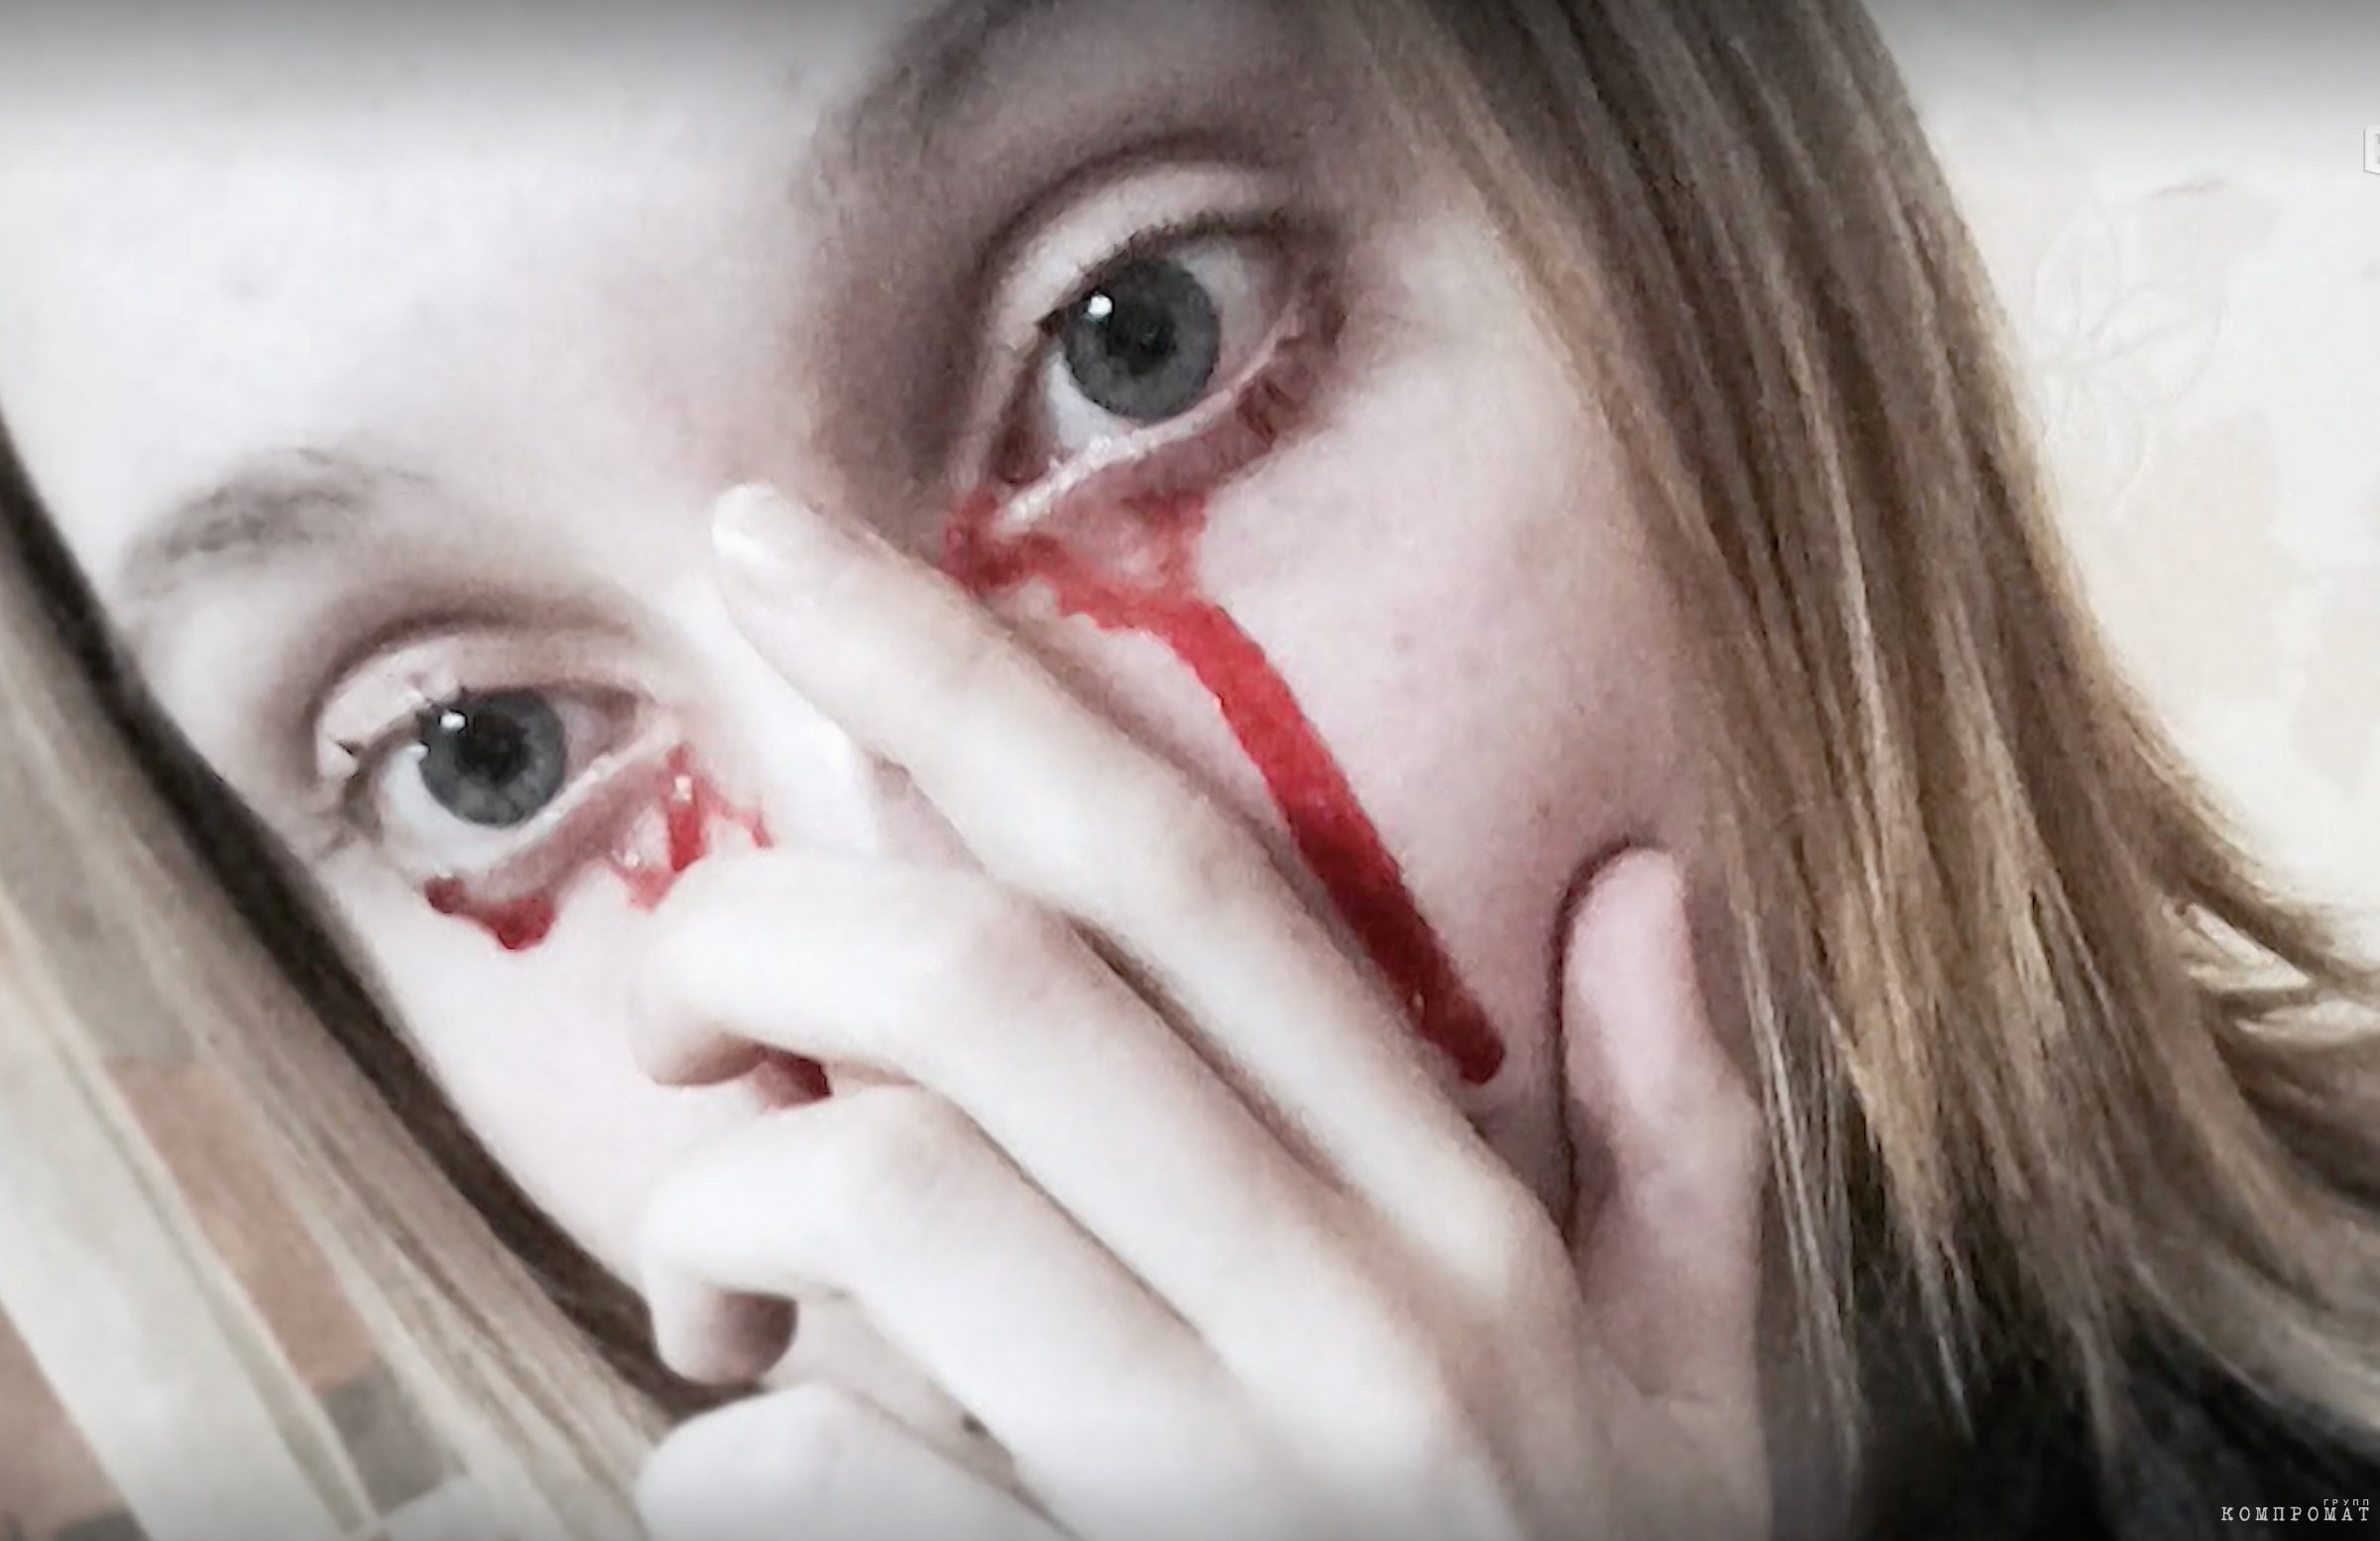 The photo shows that the "blood" under the girl